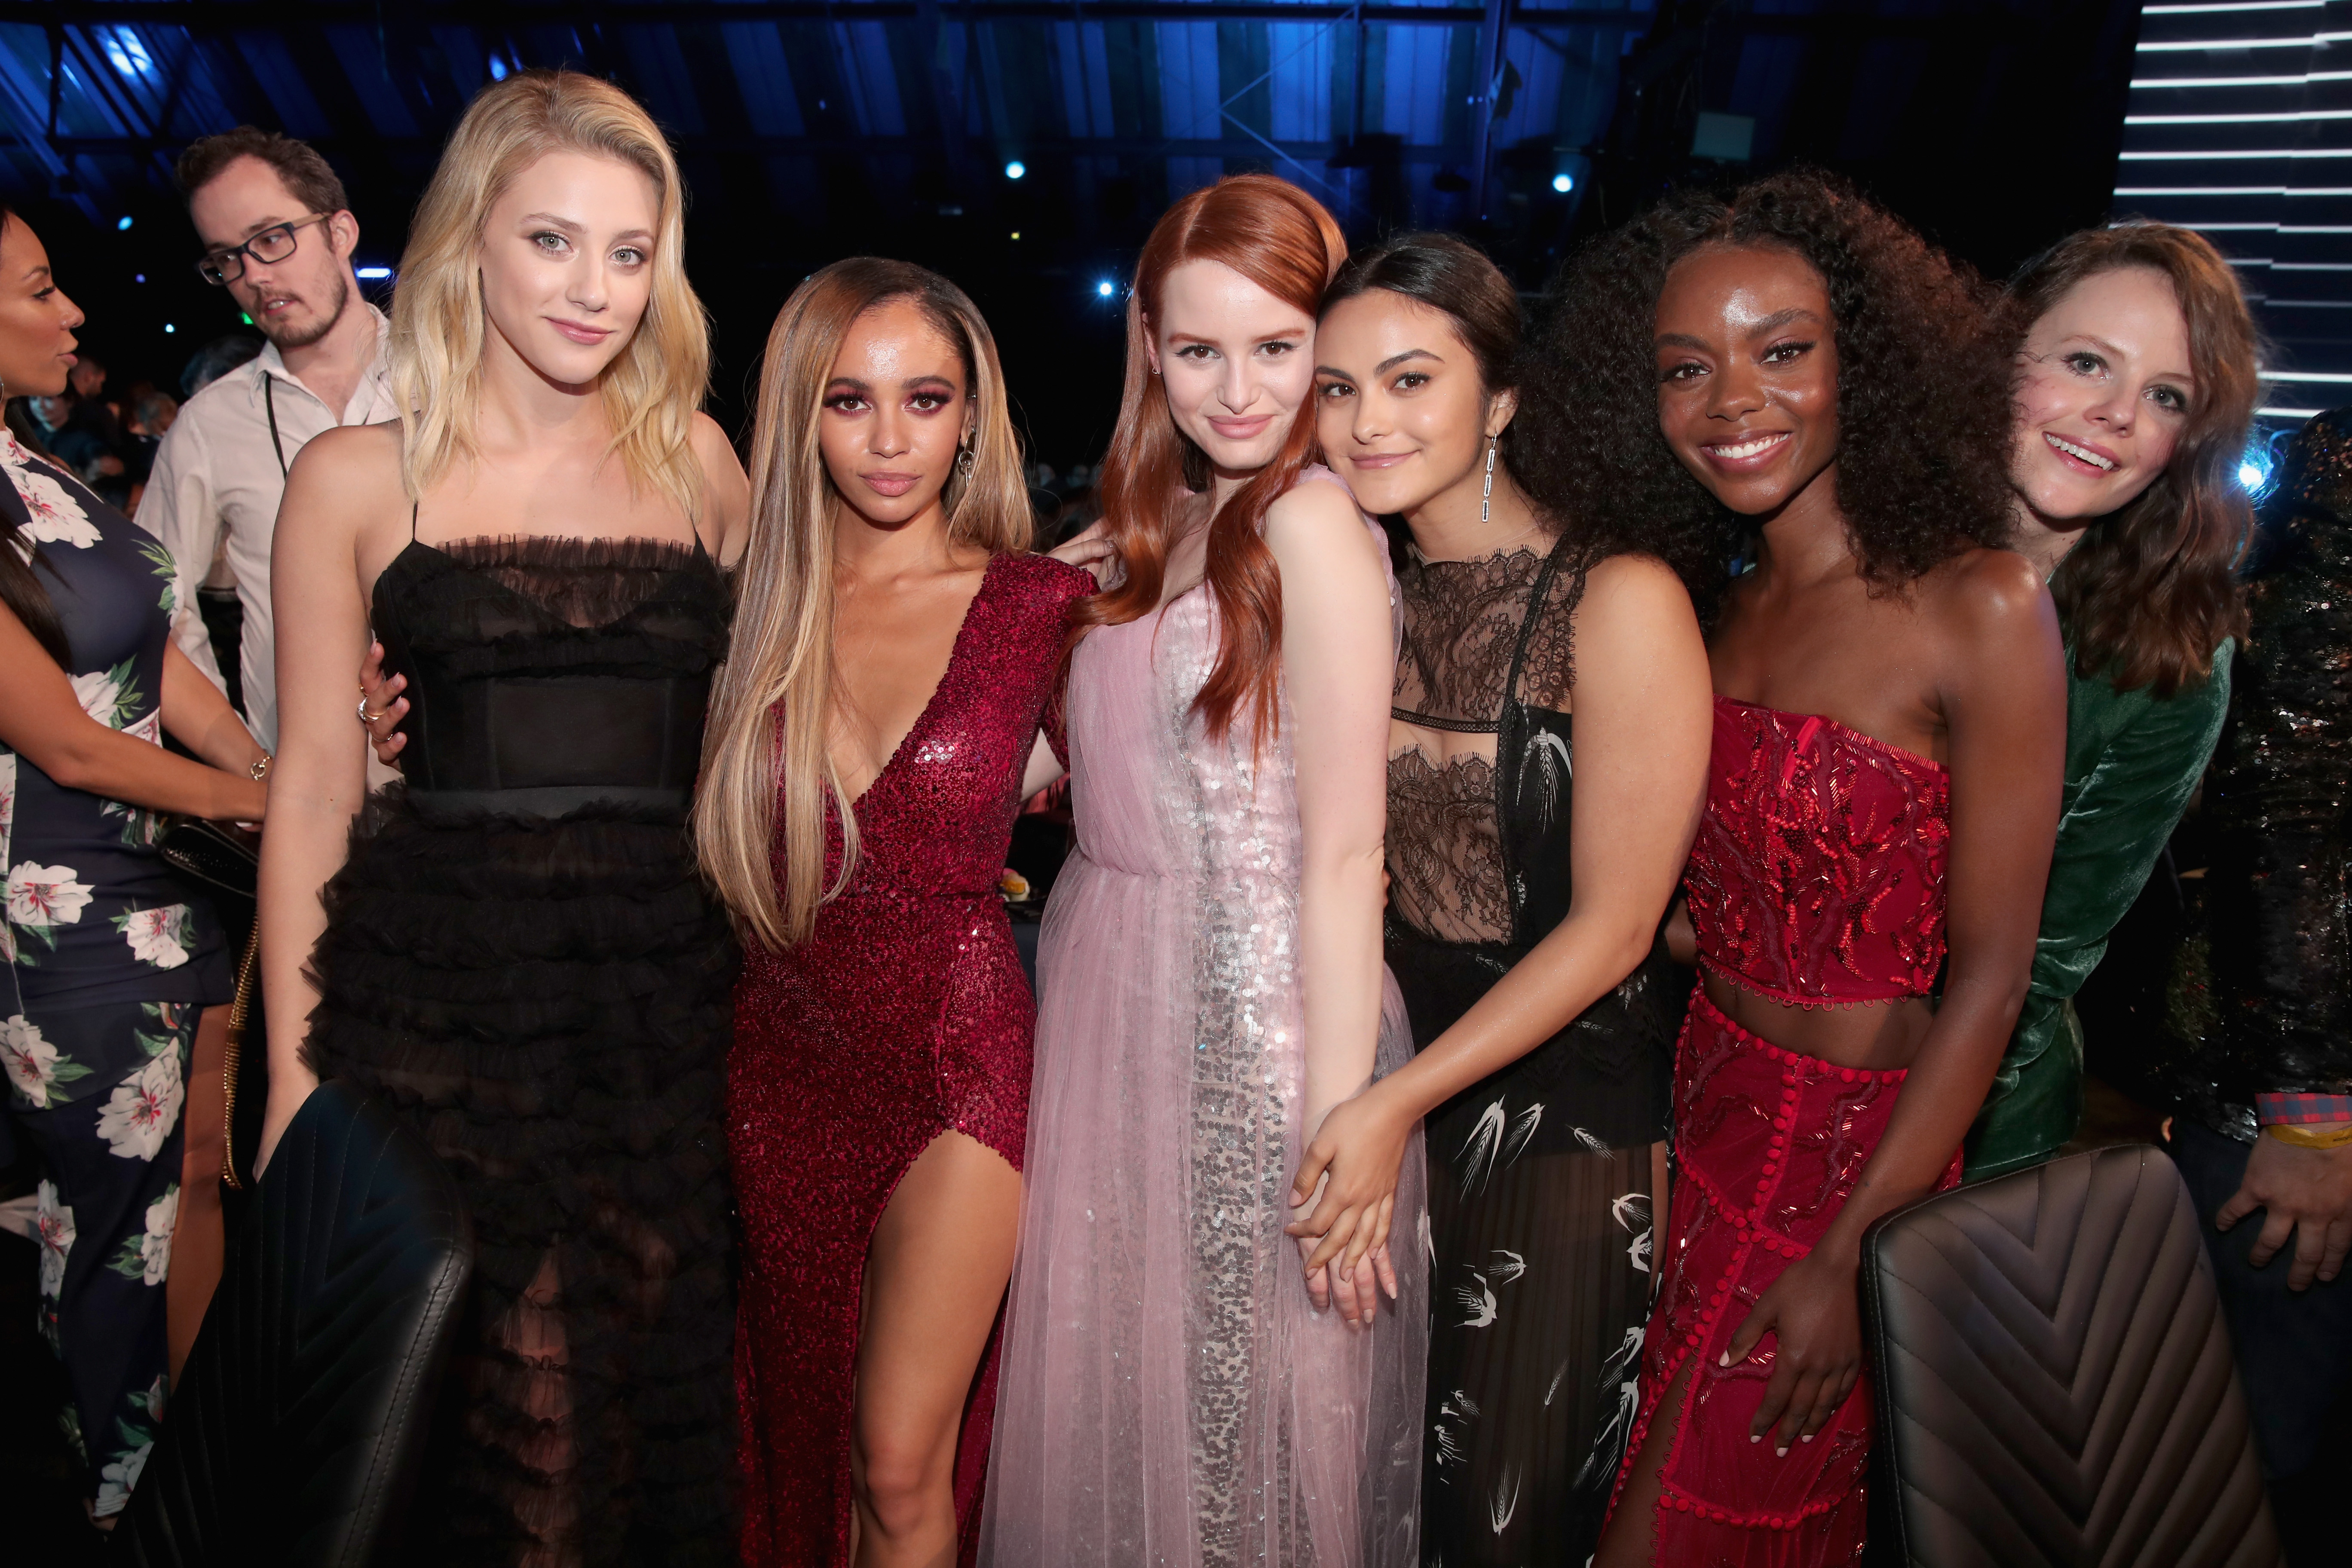 Lili Reinhart, Vanessa Morgan, Madelaine Petsch, Camila Mendes, and Ashleigh Murray at the MTV Movie And TV Awards held at Barker Hangar in Santa Monica, CA, on June 16, 2018. | Source: Getty Images